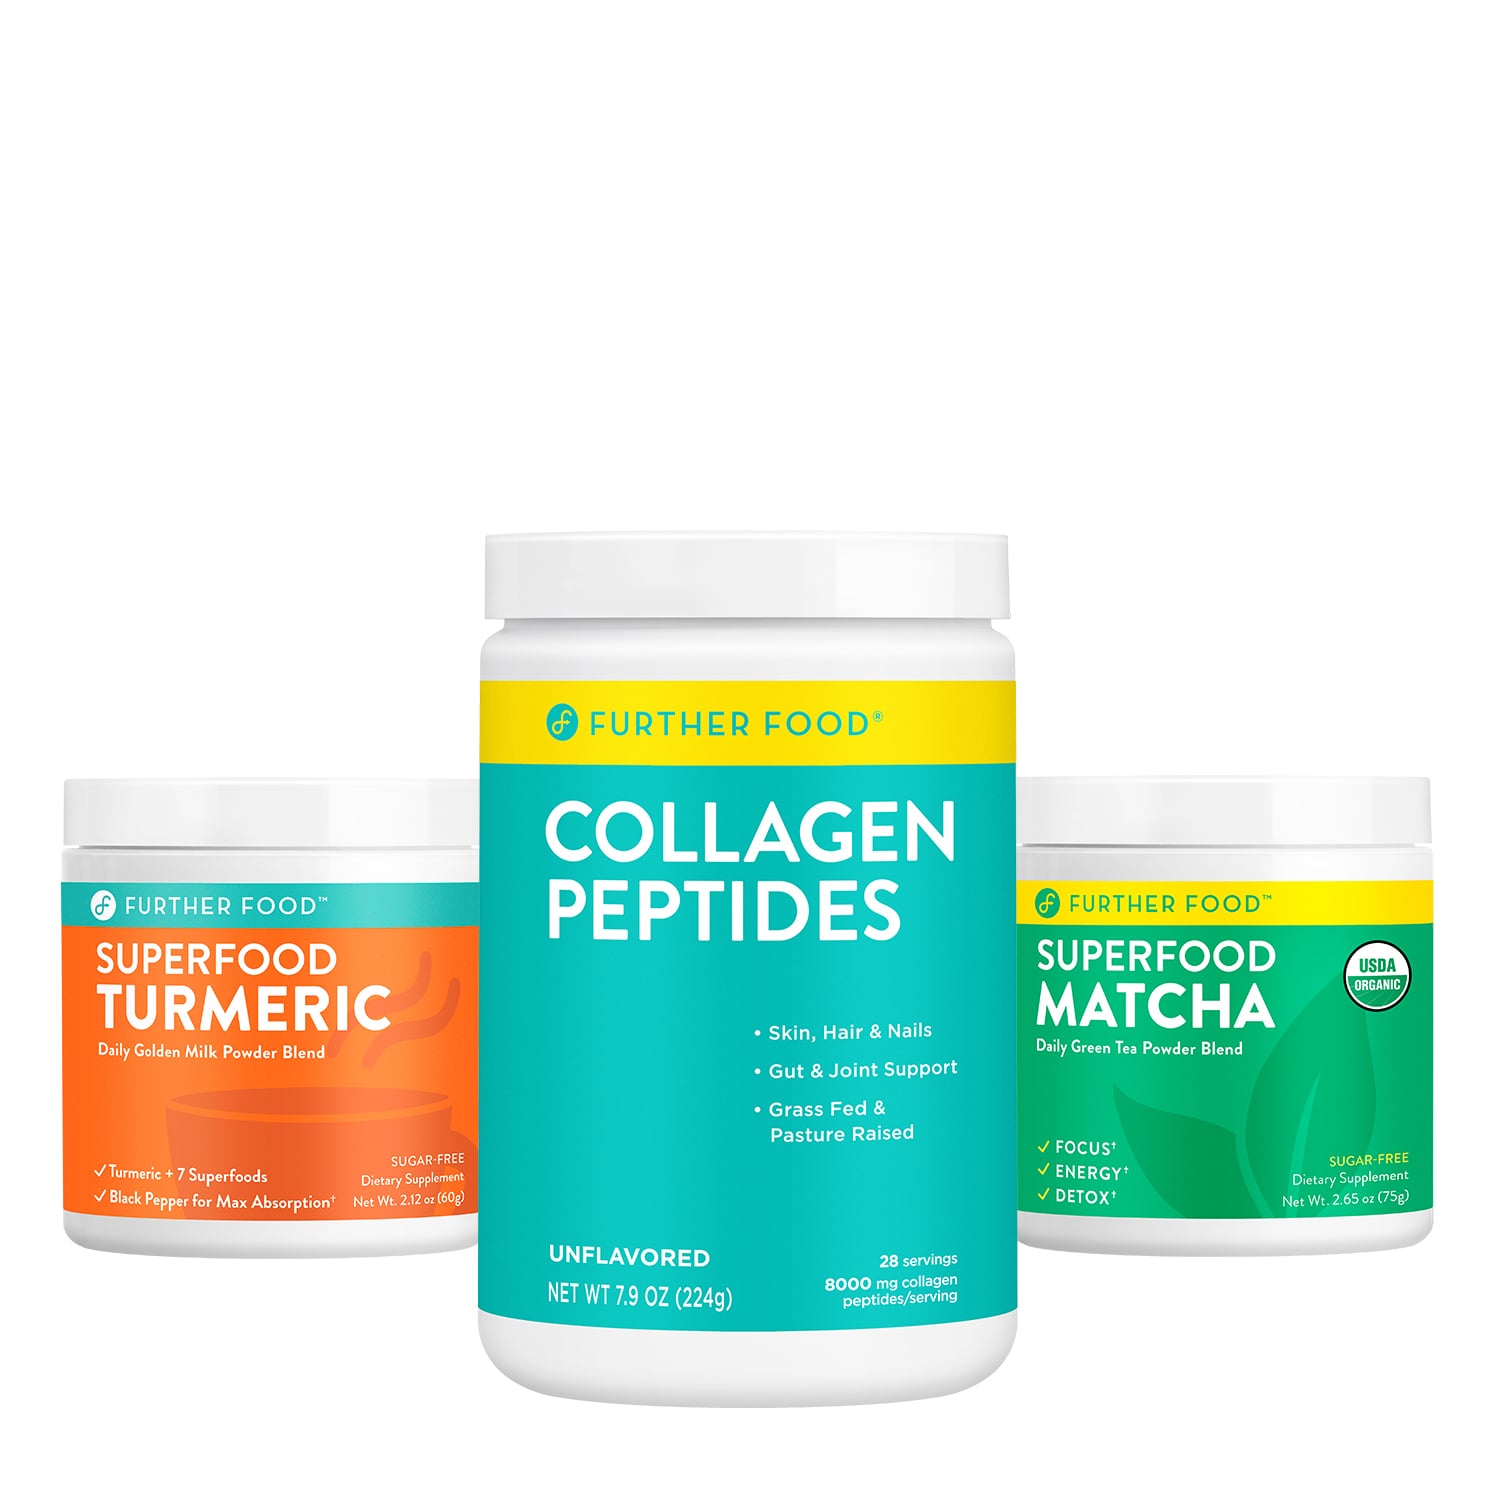 Further Food Best Seller Bundle of Collagen and Superfoods